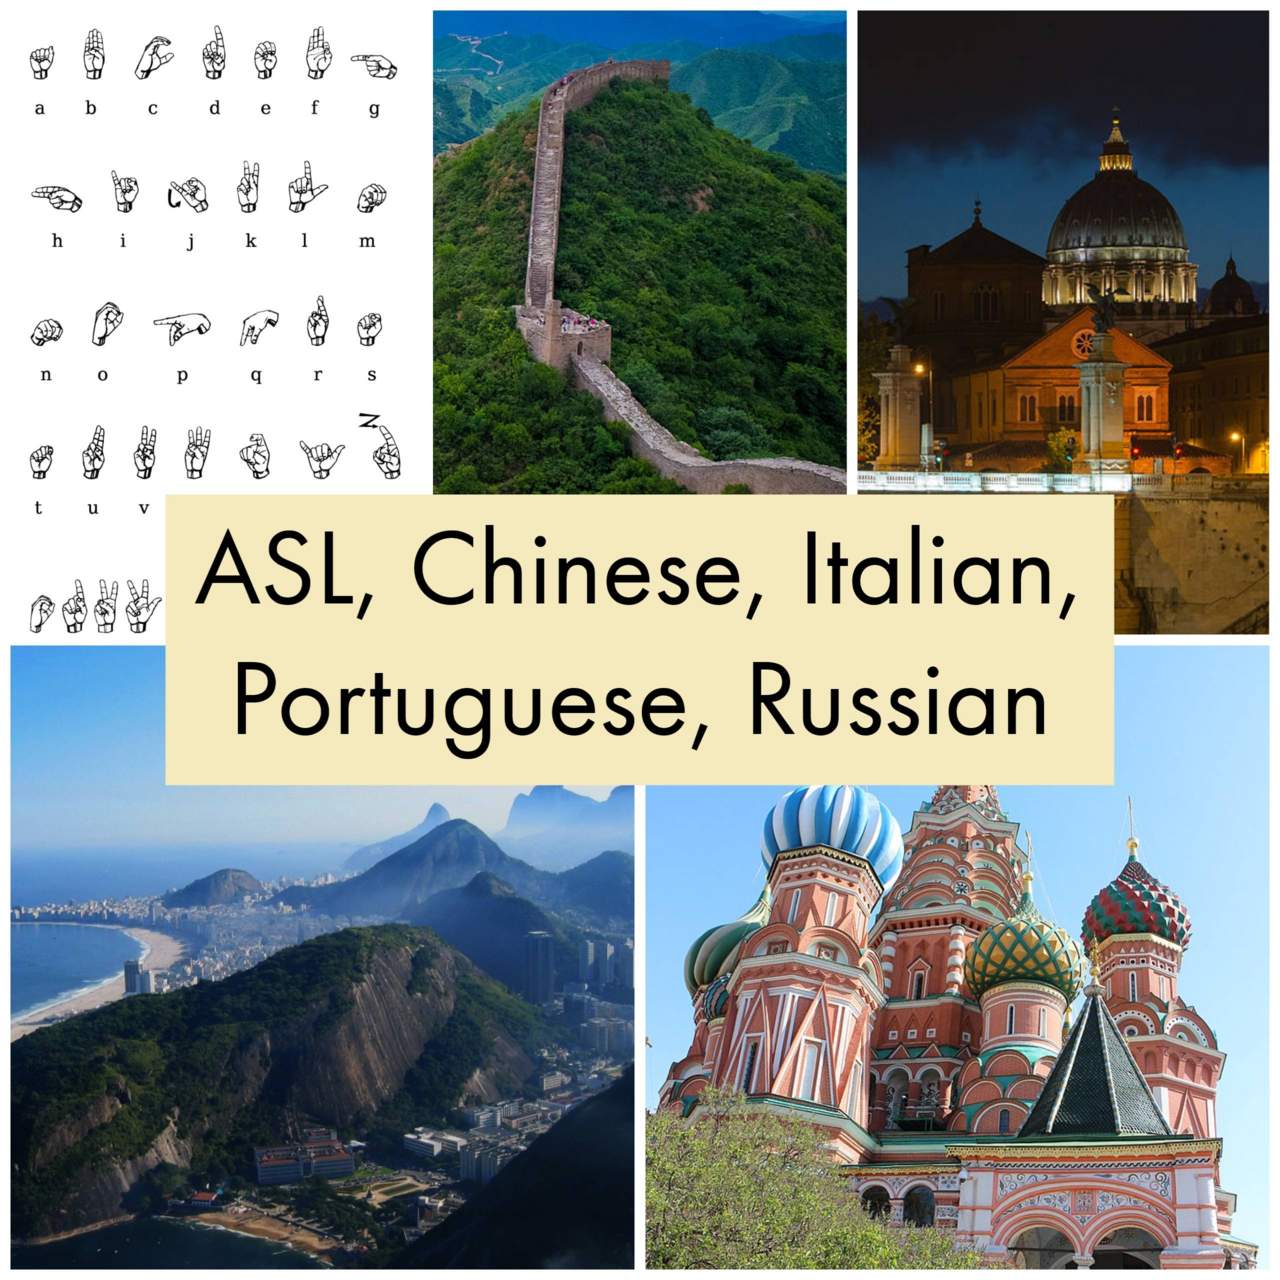 Text: ASL, Chinese, Italian, Portuguese, Russian. Images: ASL alphabet,  public domain, The Great Wall of China at Jinshanling, photo by Severin.stalder, CC BY 3.0 license, Ponte Vittorio Emanuele II San Pietro, Rome, Italy. Photo by Jebulon, CC BY 3.0 license, A view of Rio de Janeiro in the direction of Copacabana and Ipanema, from Sugarloaf mountain, Breogan37, CC BY-SA 3.0 license, Saint Basil's Cathedral (Cathedral of the Protection of Most Holy Theotokos on the Moat) on Red Square in Moscow (Russia). Photo by Alvesgaspar, CC BY 3.0 license